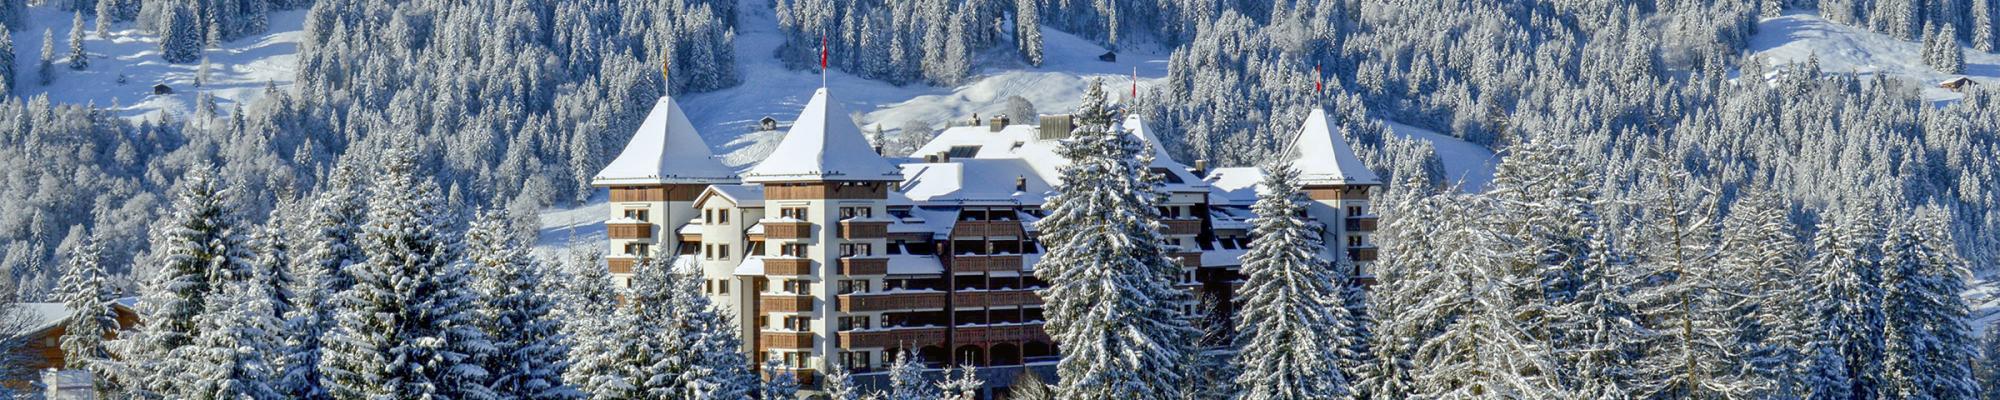 The Alpain Gstaad hotel from a distance with rooftops covered with snow and fir trees in the foreground